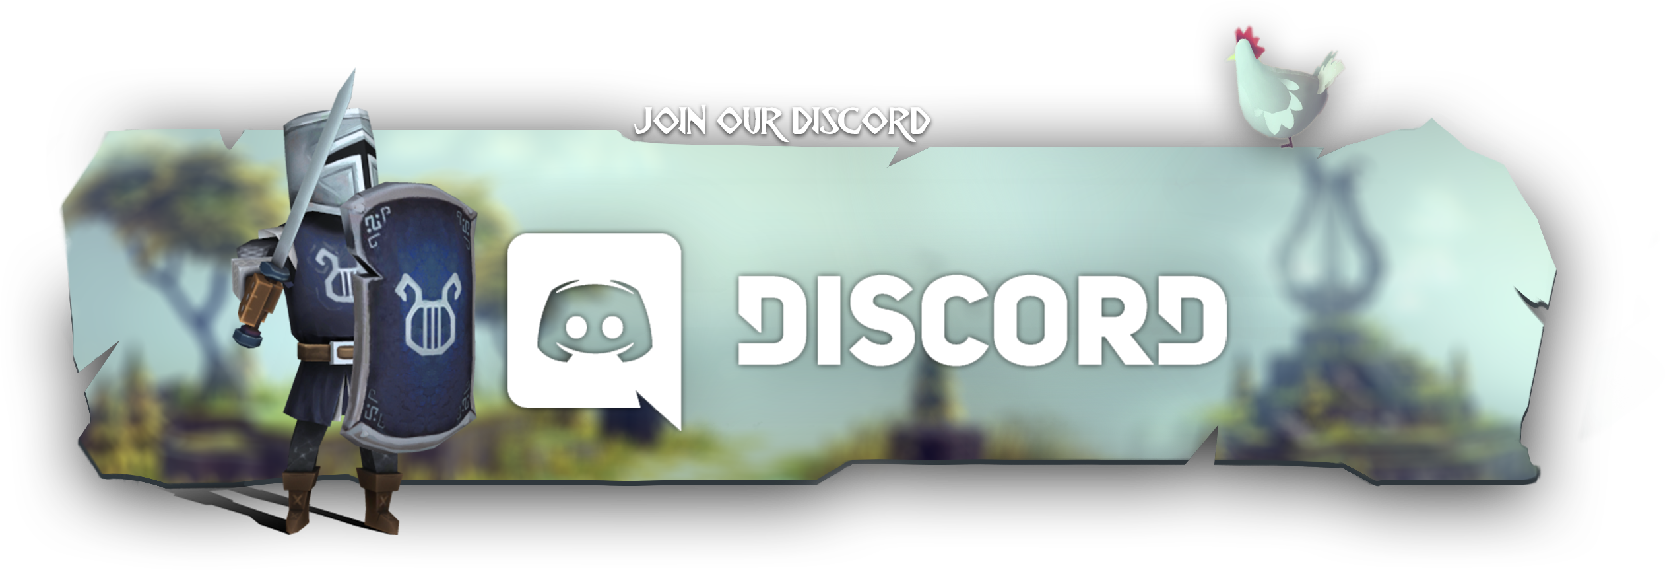 Anime Dimensions Discord Link for Update Patch Notes - Touch, Tap